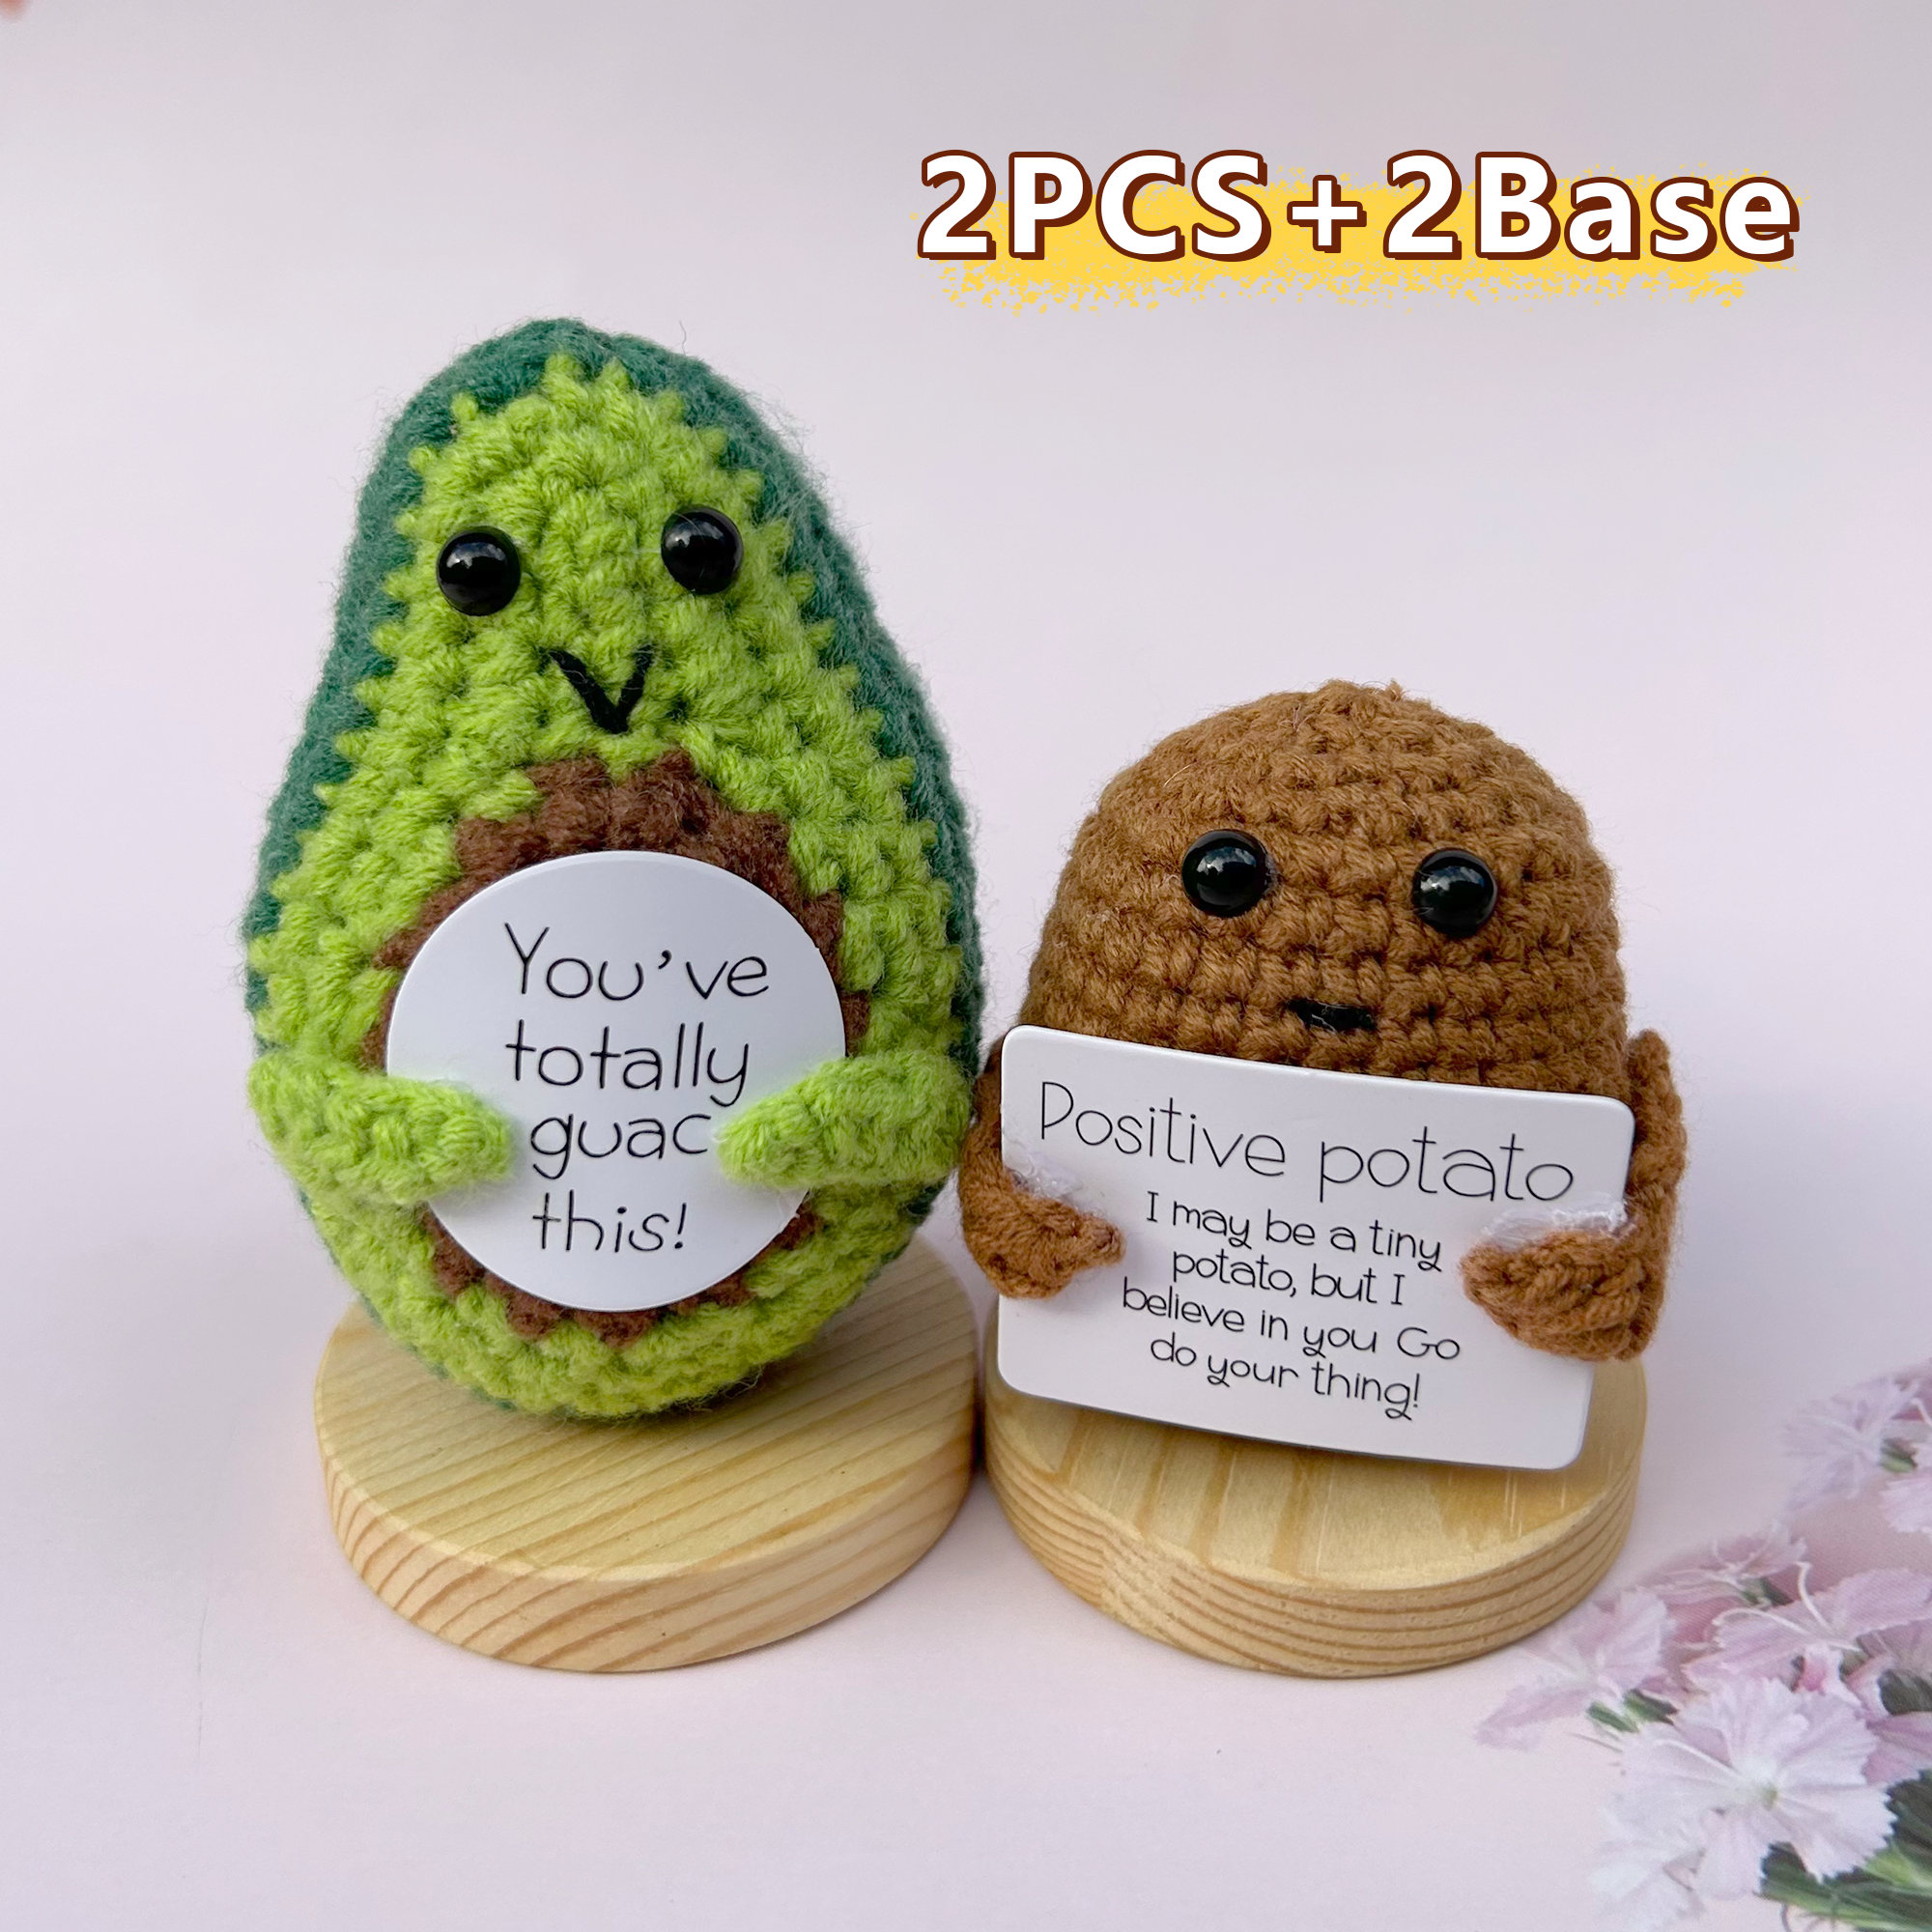 Handmade Emotional Support Avocado With Stand, Cute Crochet